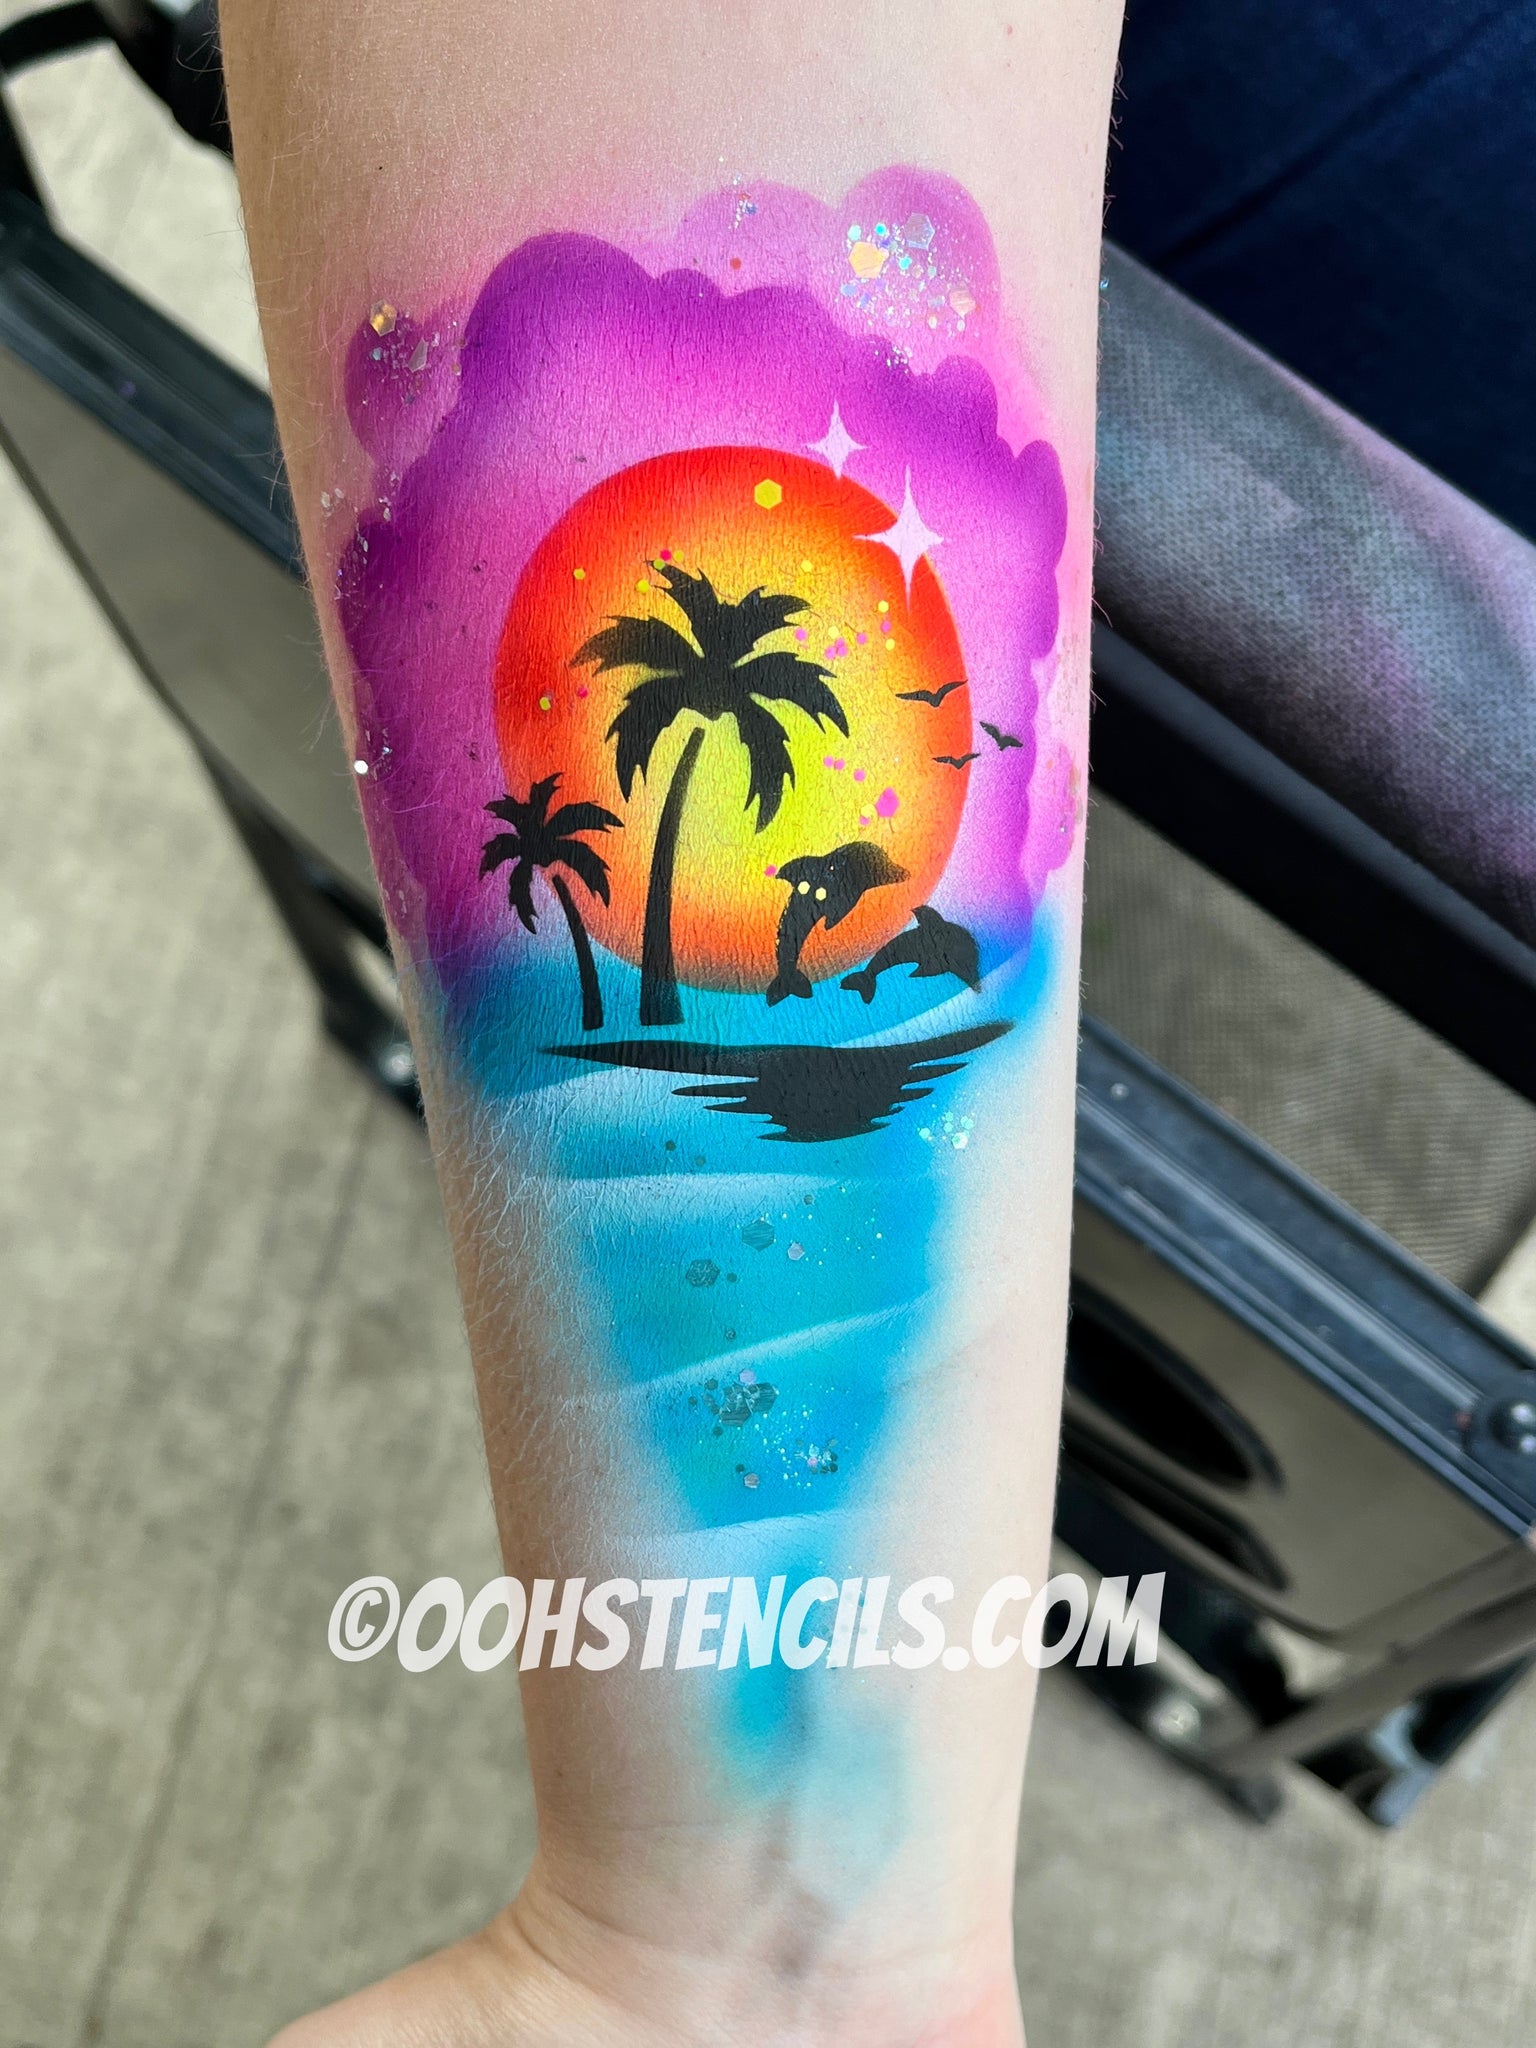 Lake, sunset and galaxy tattoo. Done at Addictions in Ink, Wichita, KS by  Robbie Reel : r/tattoos